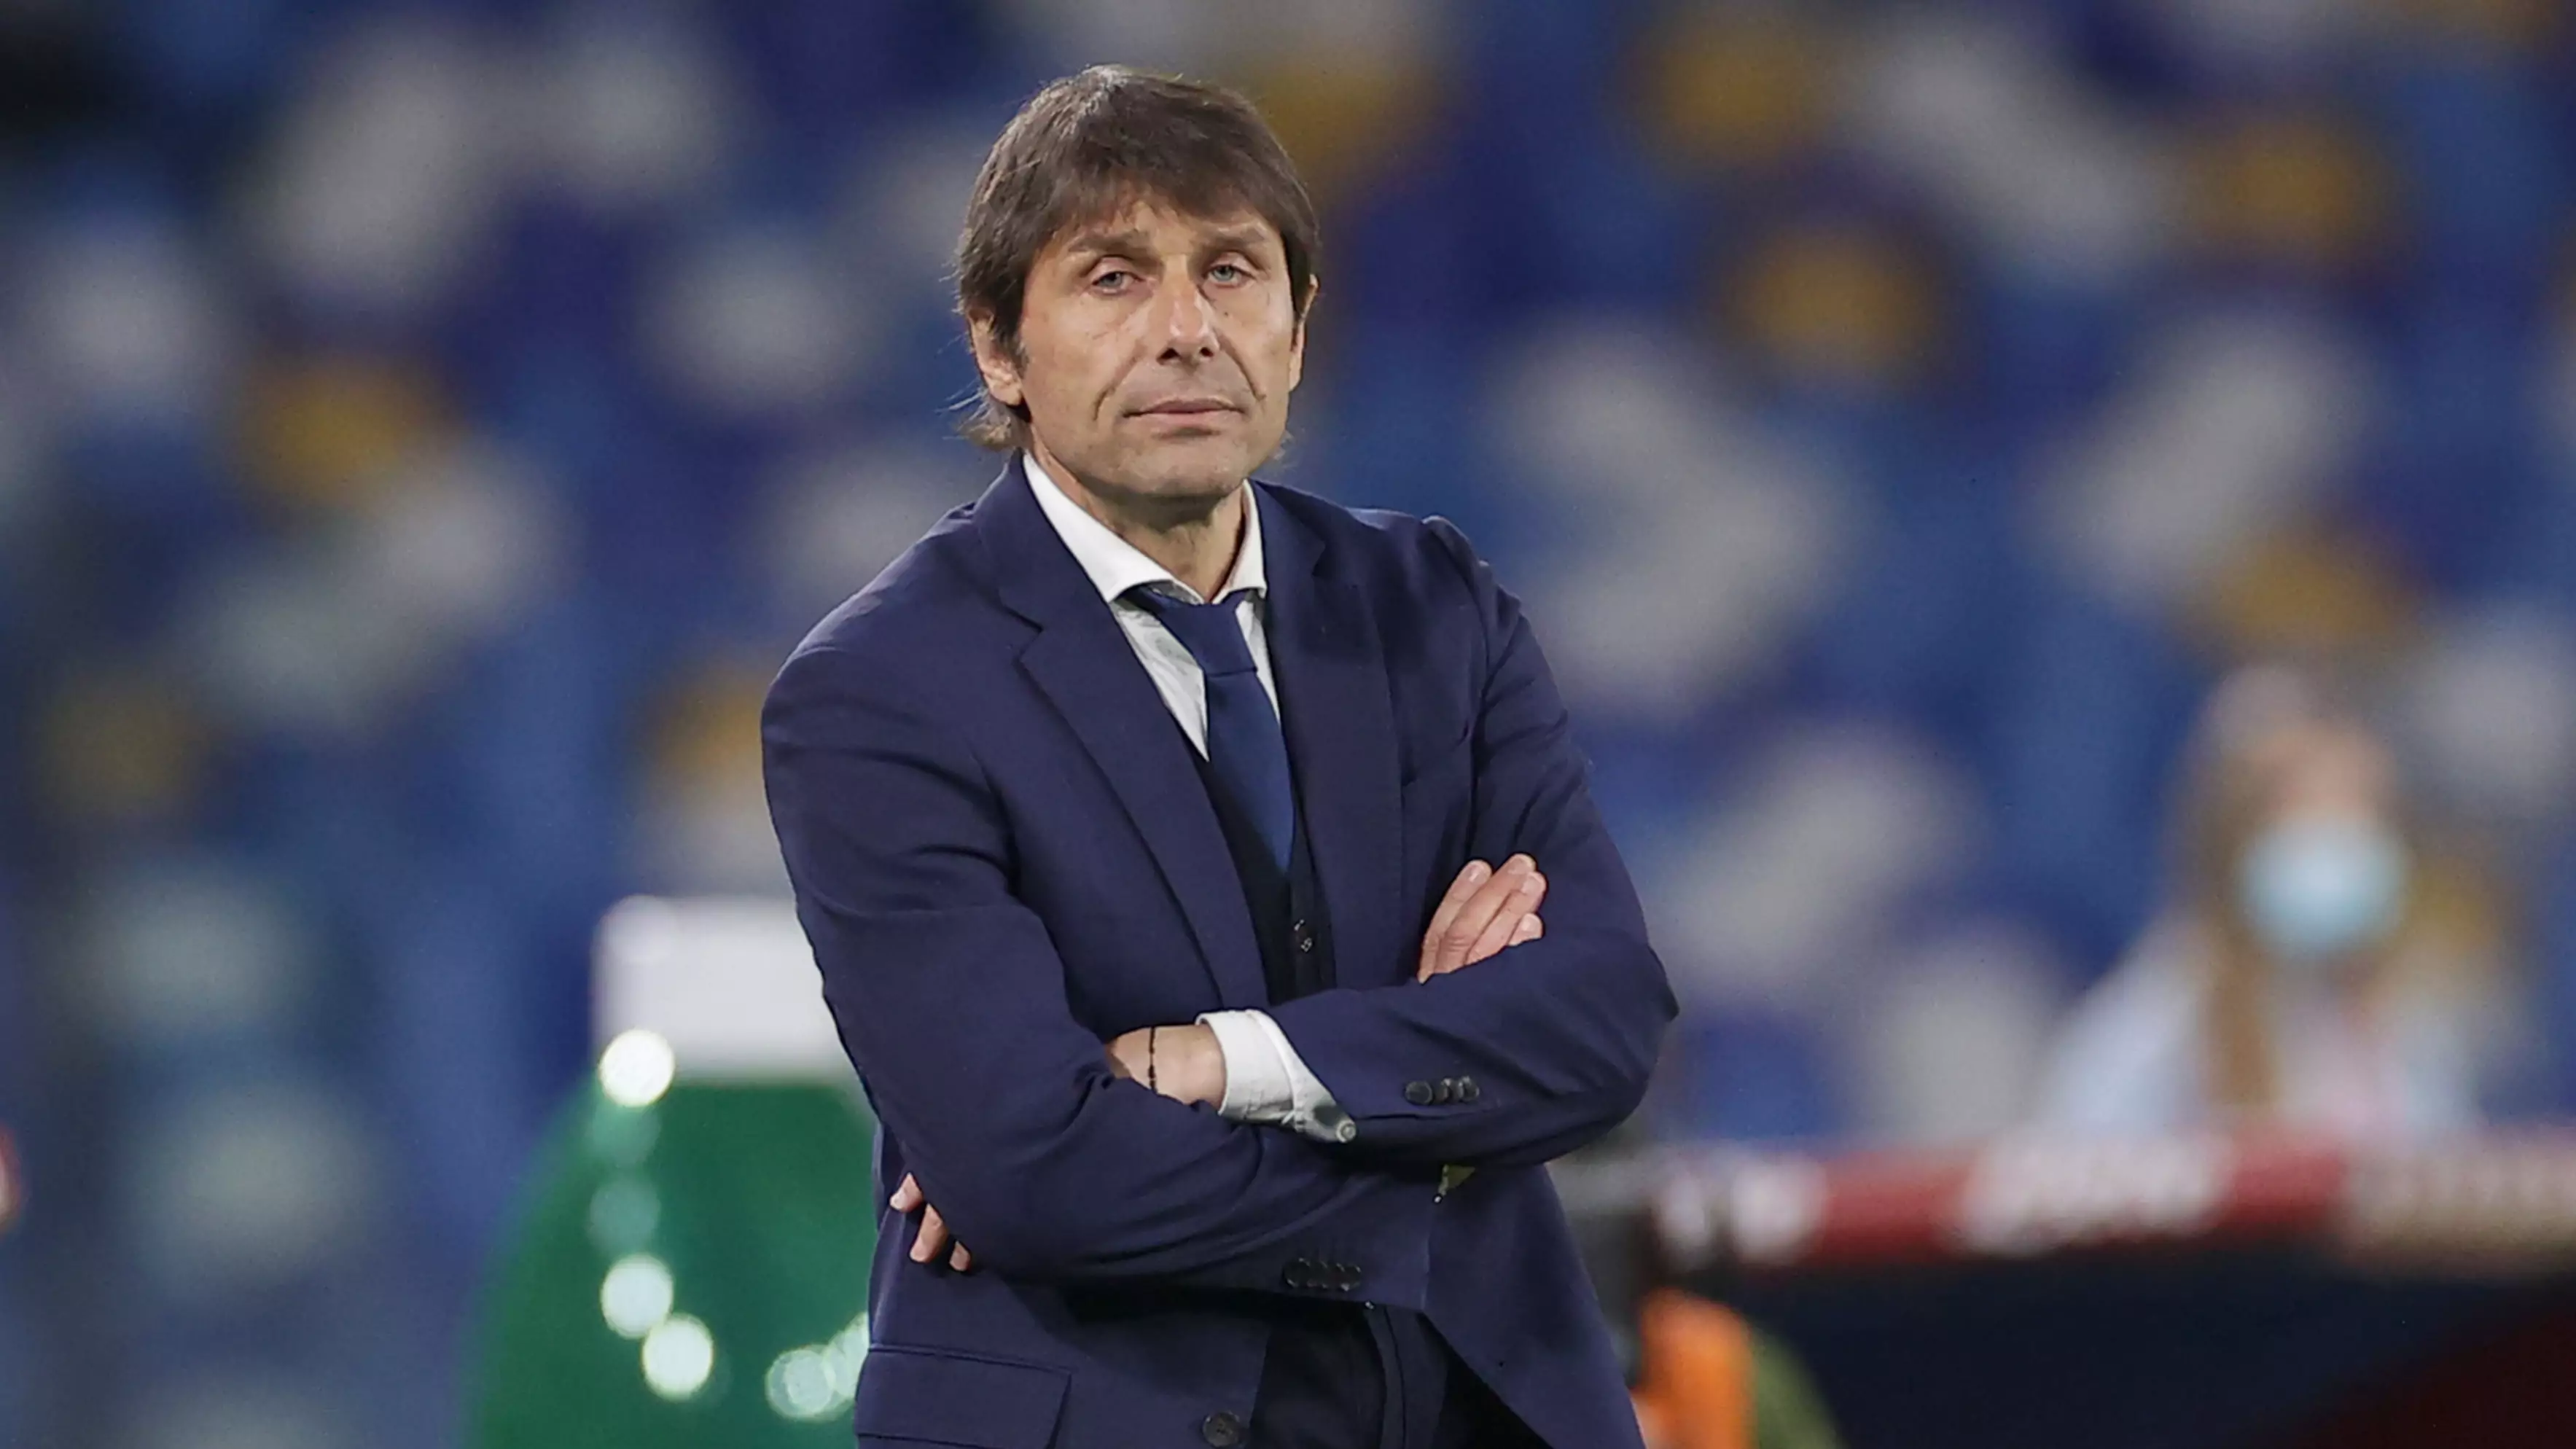 Inter Boss Antonio Conte Leaves By Mutual Consent